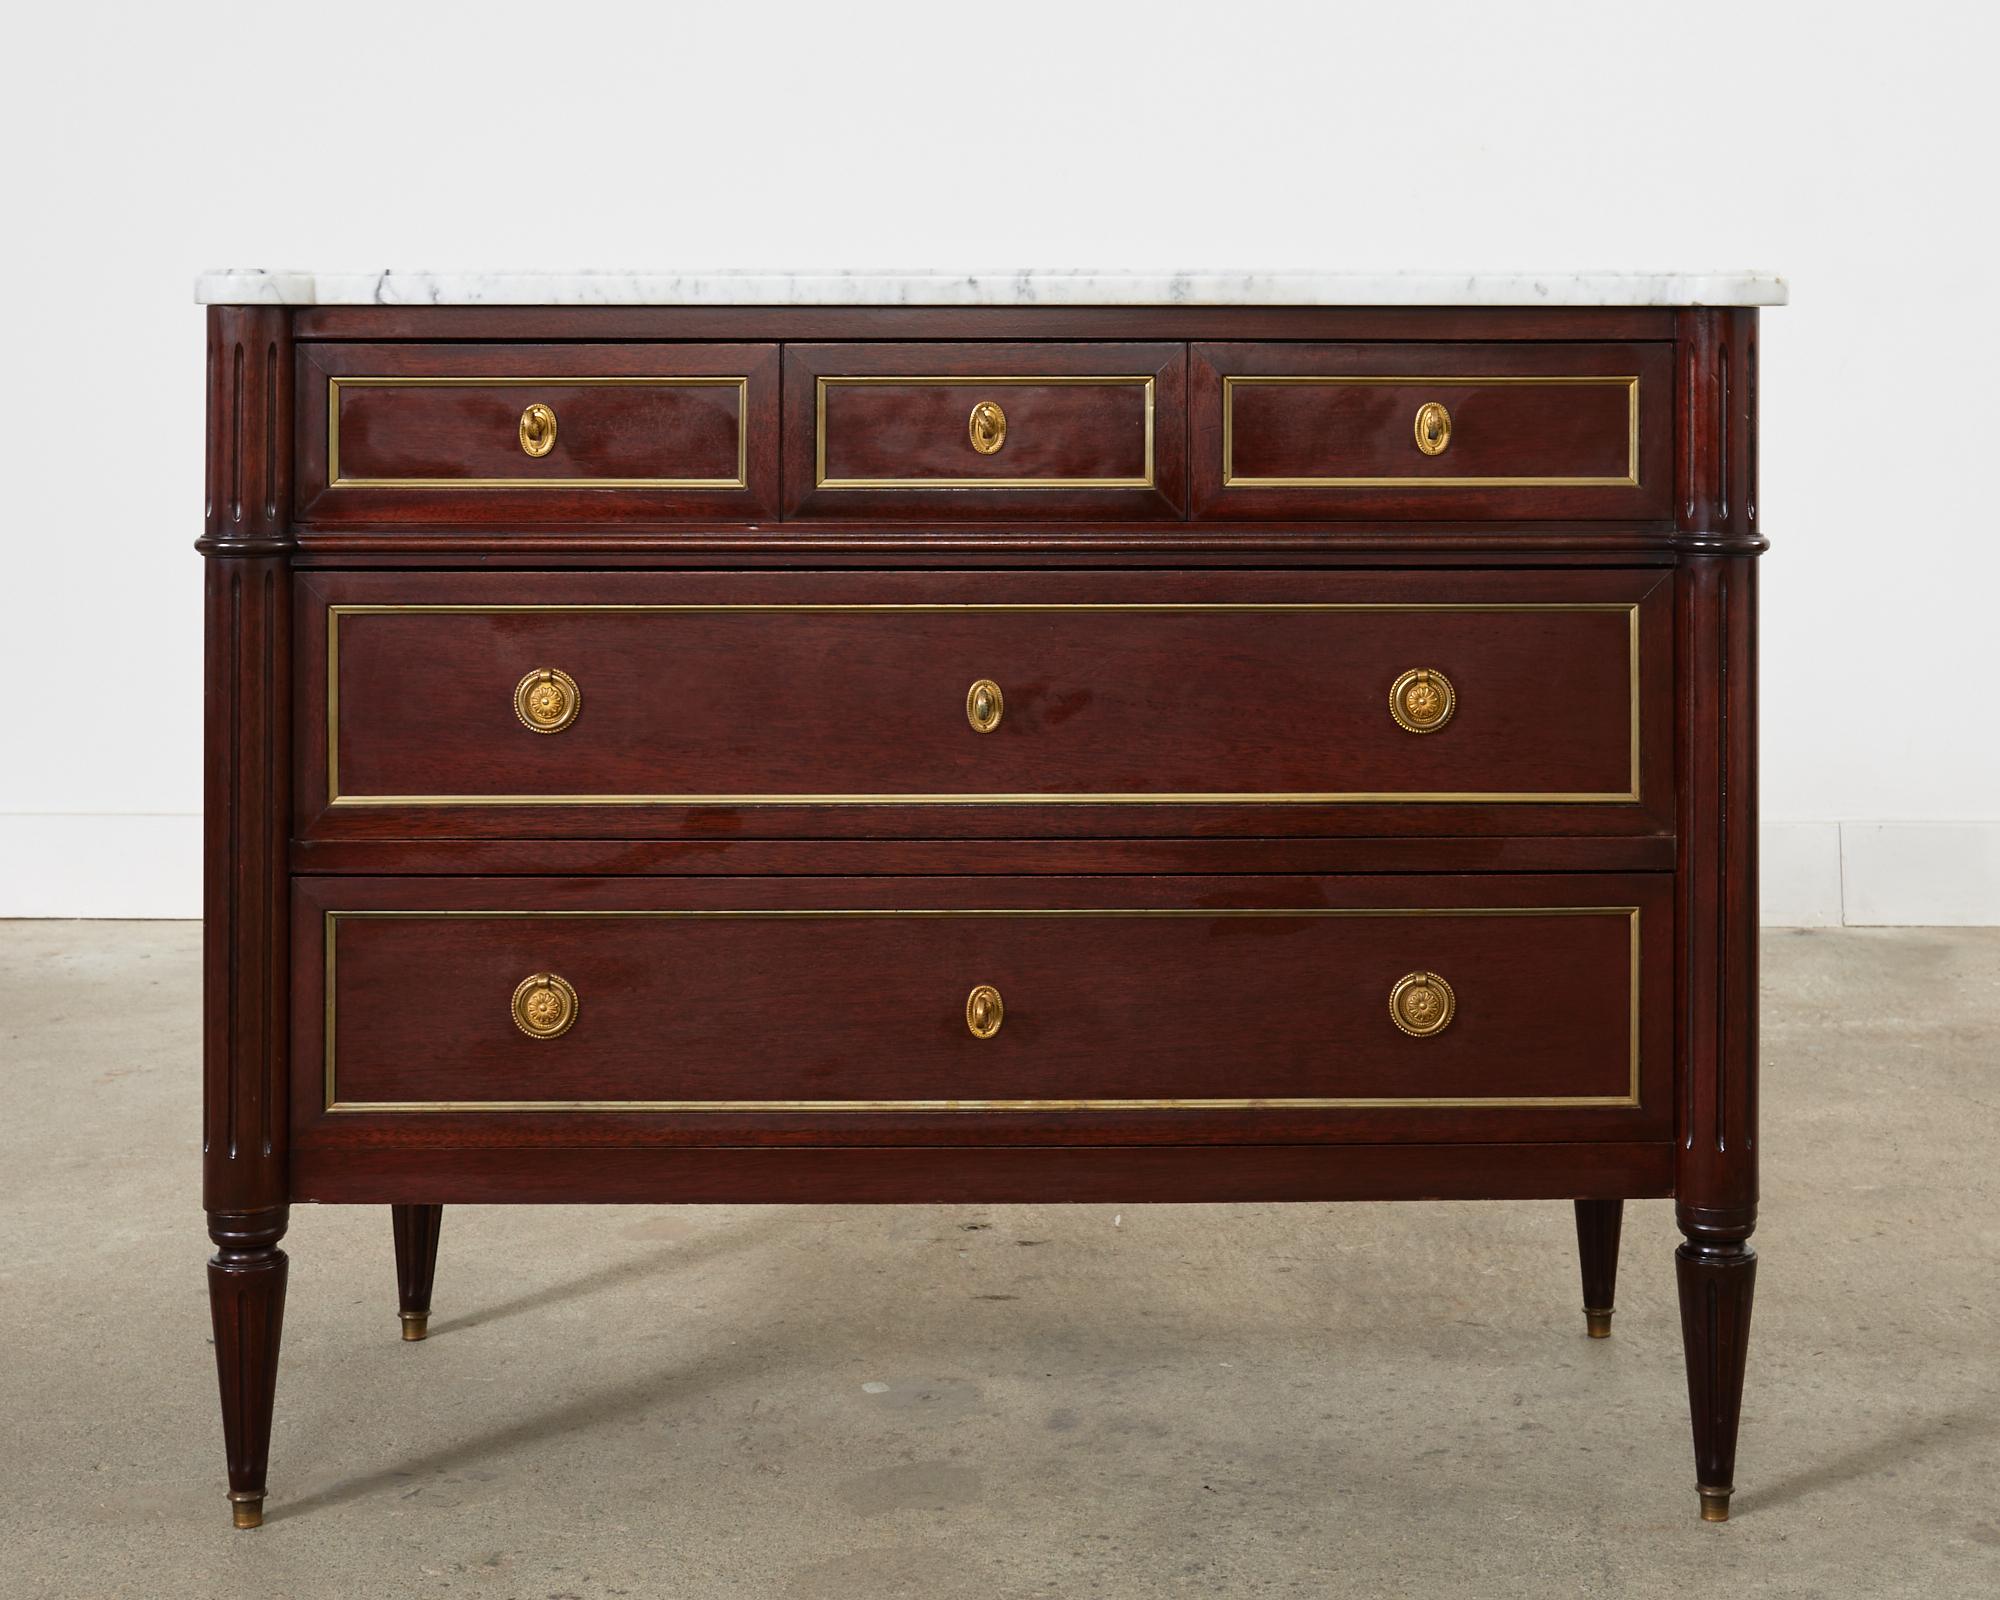 Pair of Louis XVI Style Marble Top Mahogany Commode Dressers In Good Condition For Sale In Rio Vista, CA